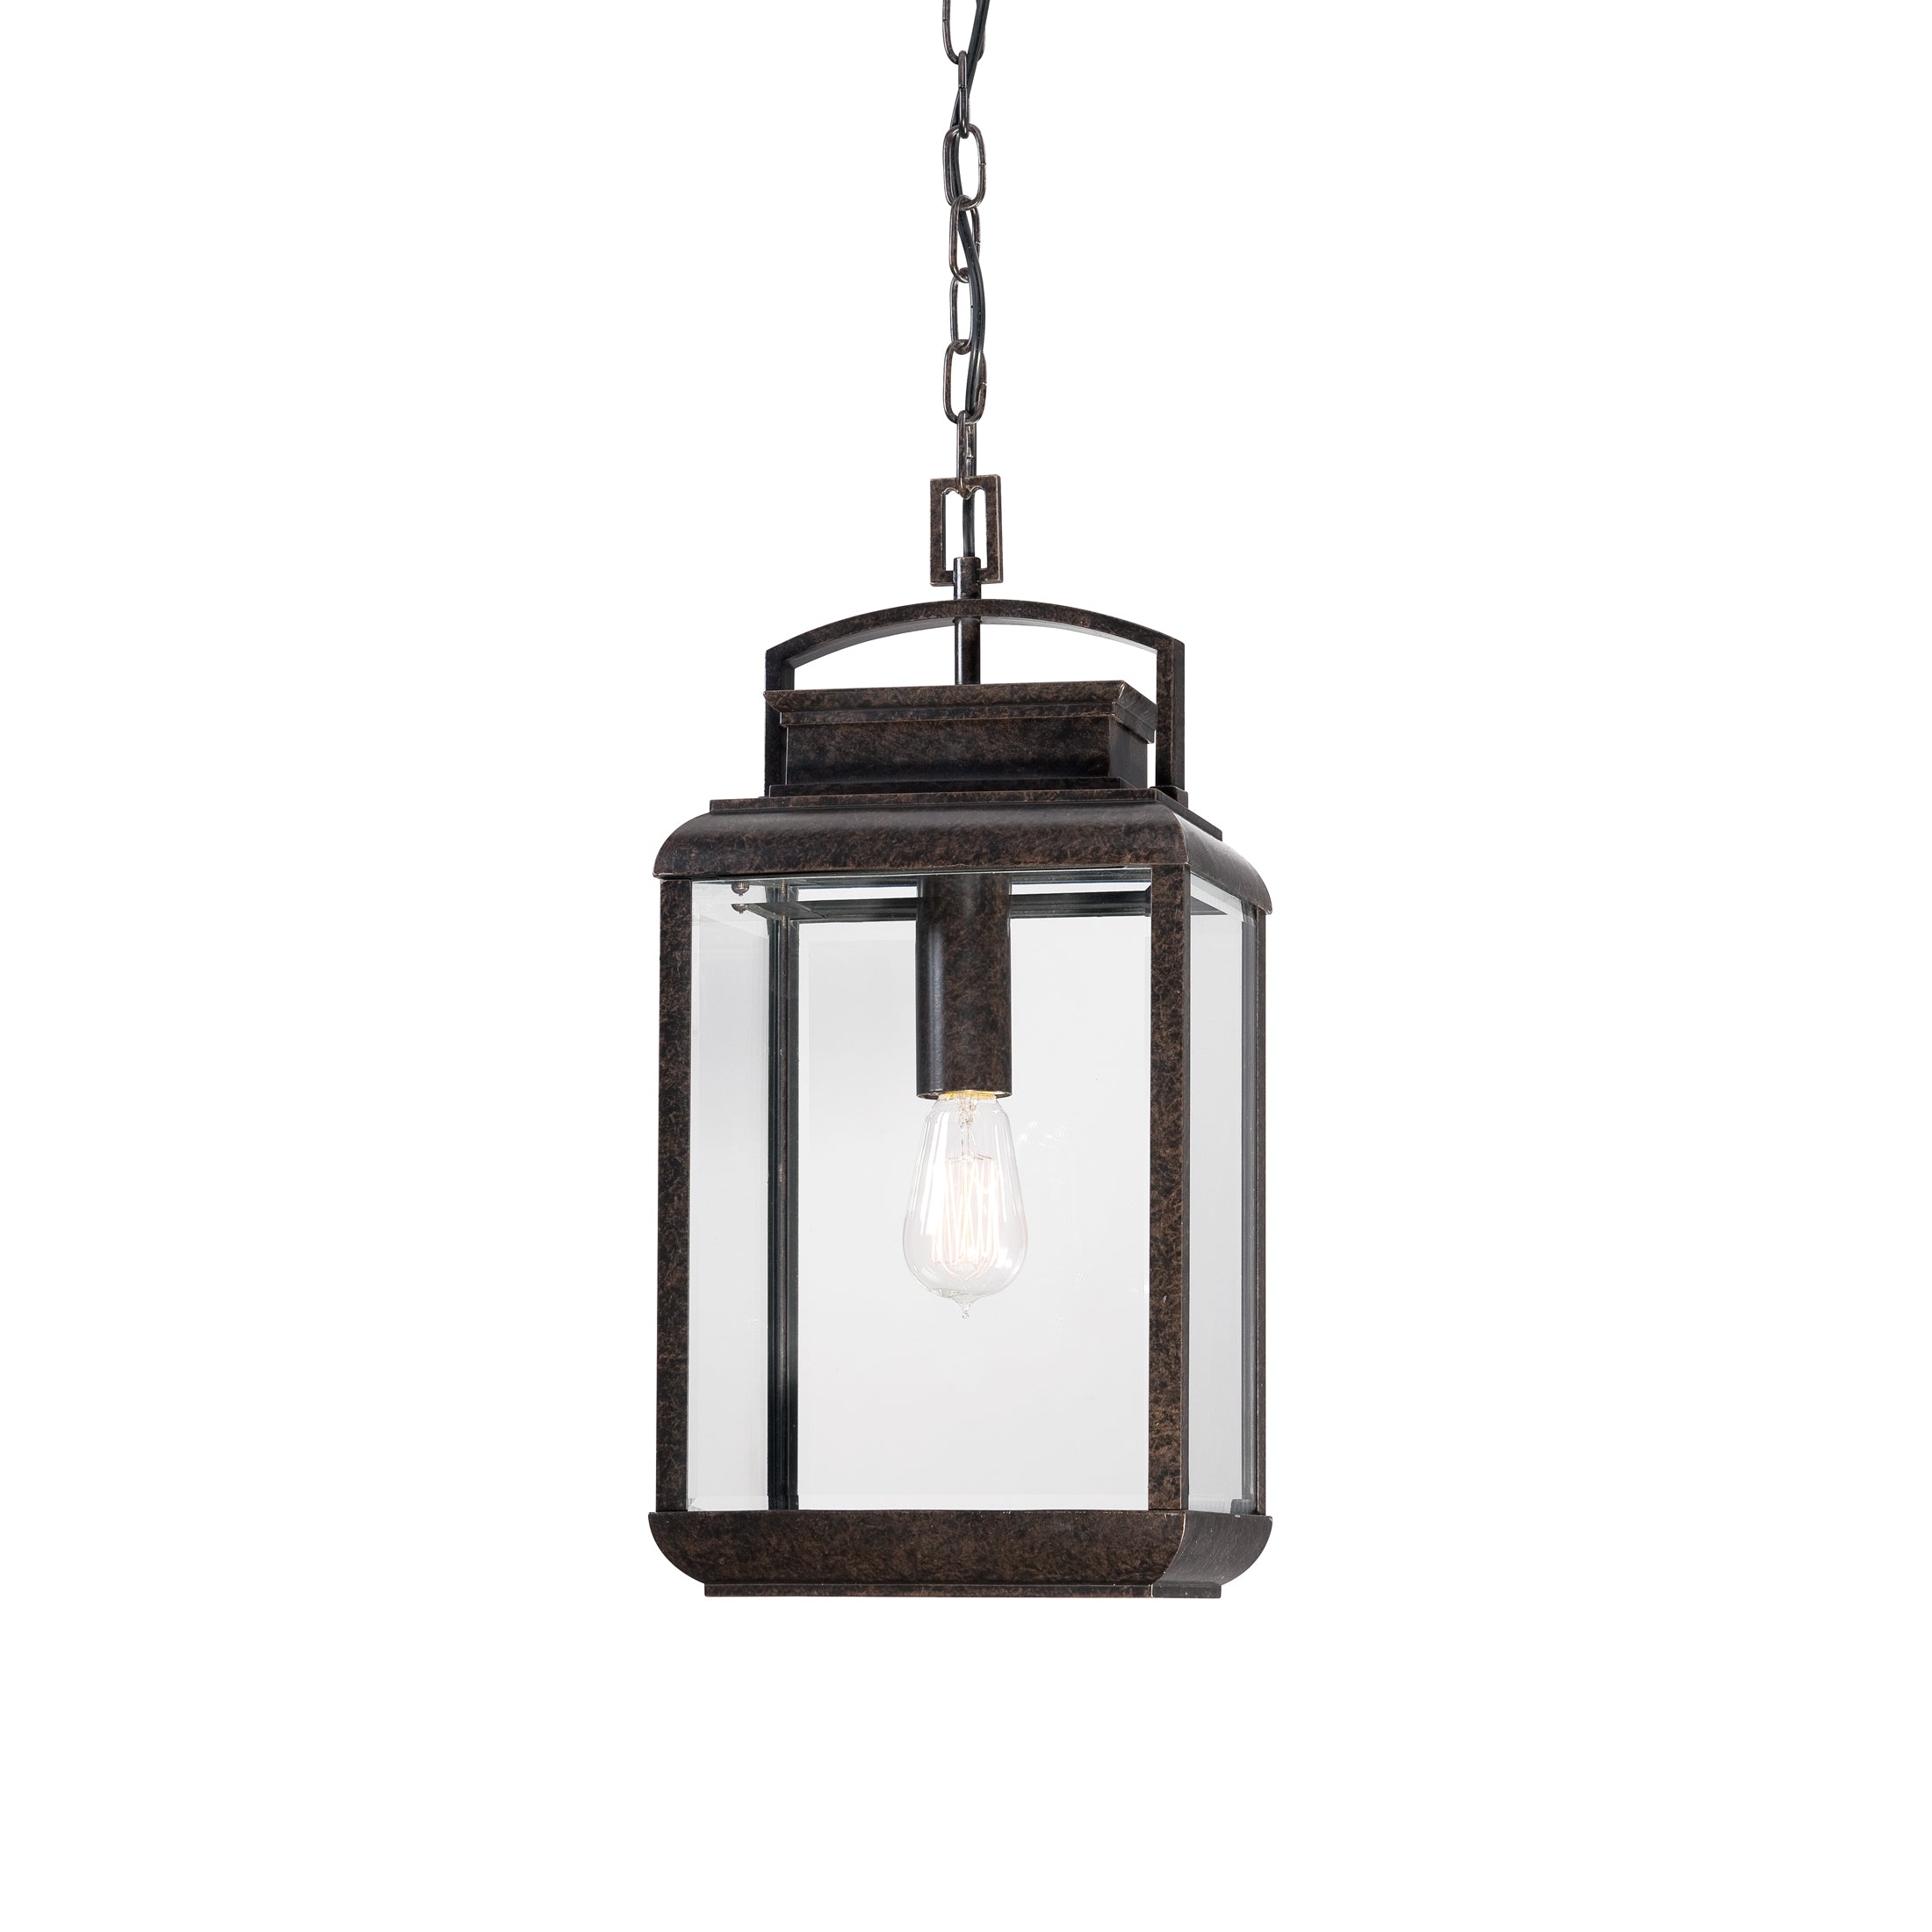 Byron Outdoor Pendant Imperial Bronze